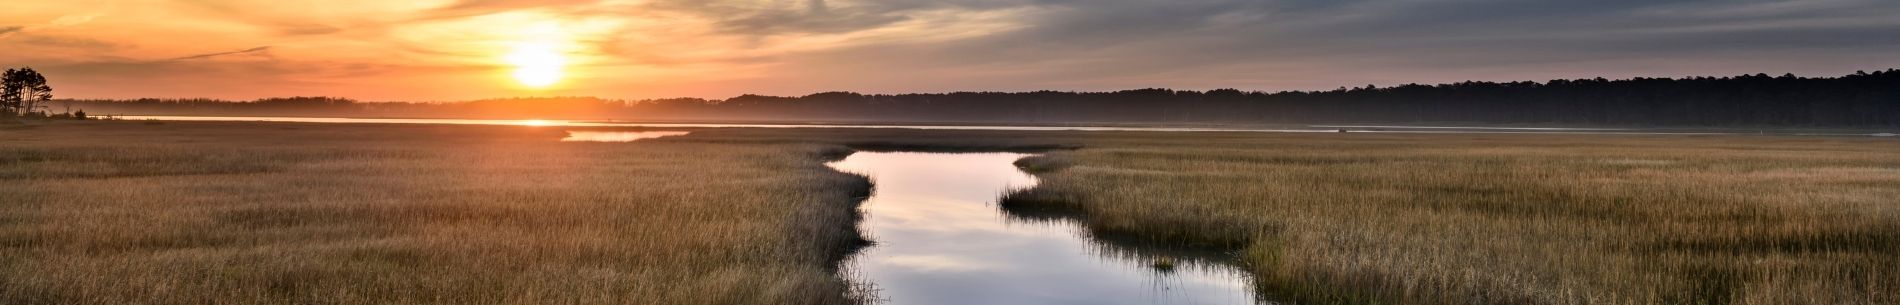 Looking out over a marsh at sunset or sunrise with sun reflecting in water